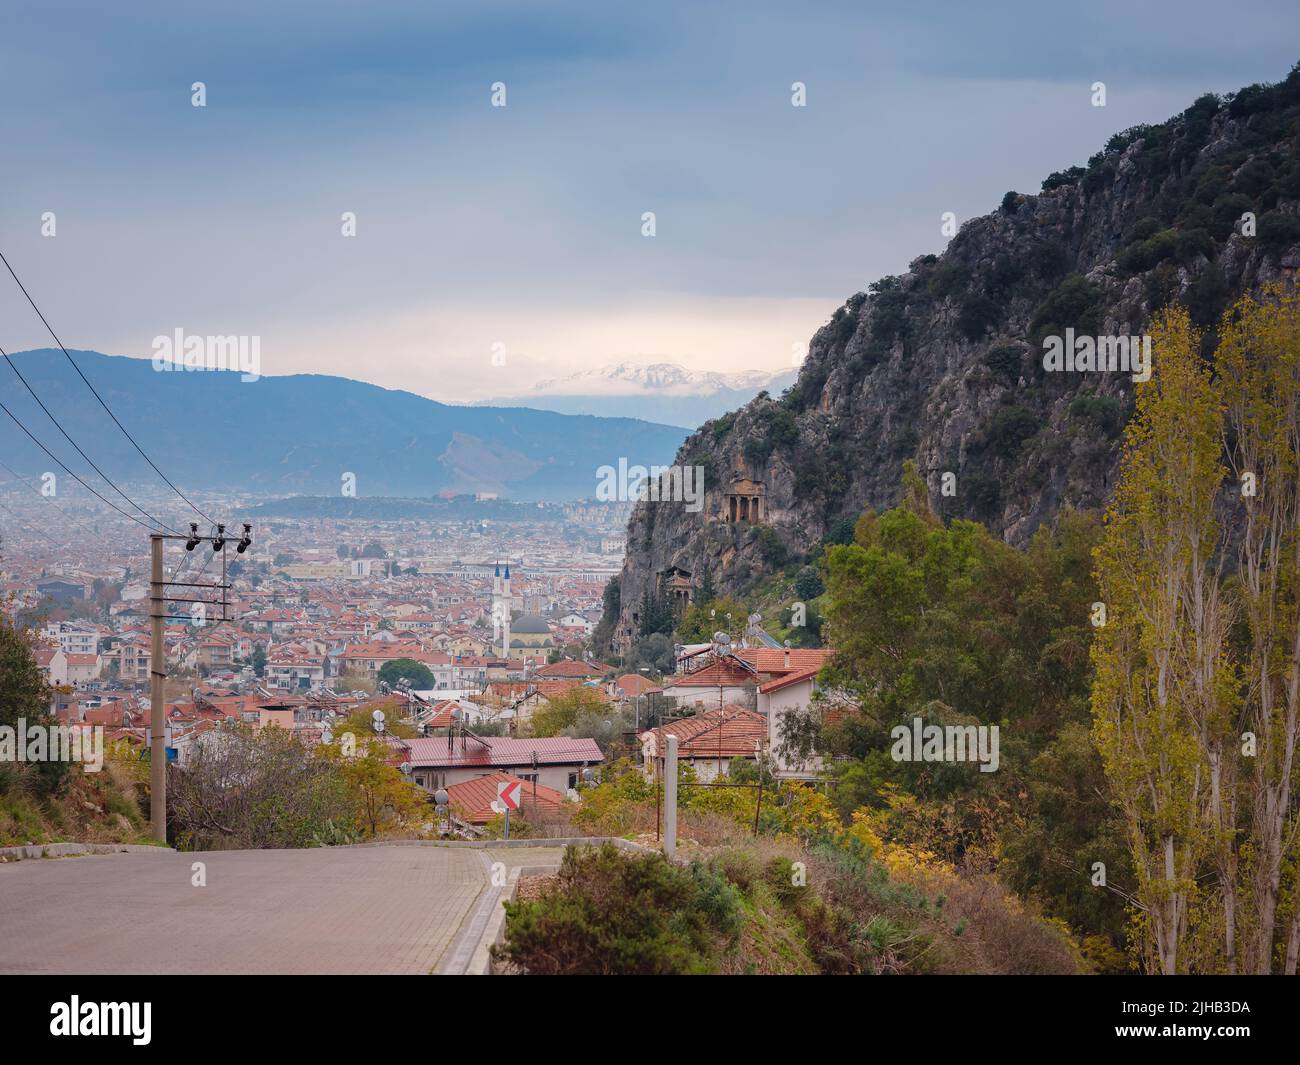 Aerial view of Fethiye landscape and cityscape. View from top. Fethiye, Mediterranean sea, Turkey. Lycian tomb in rocks above city of Fethiye overlooking mountains in snow. Stock Photo